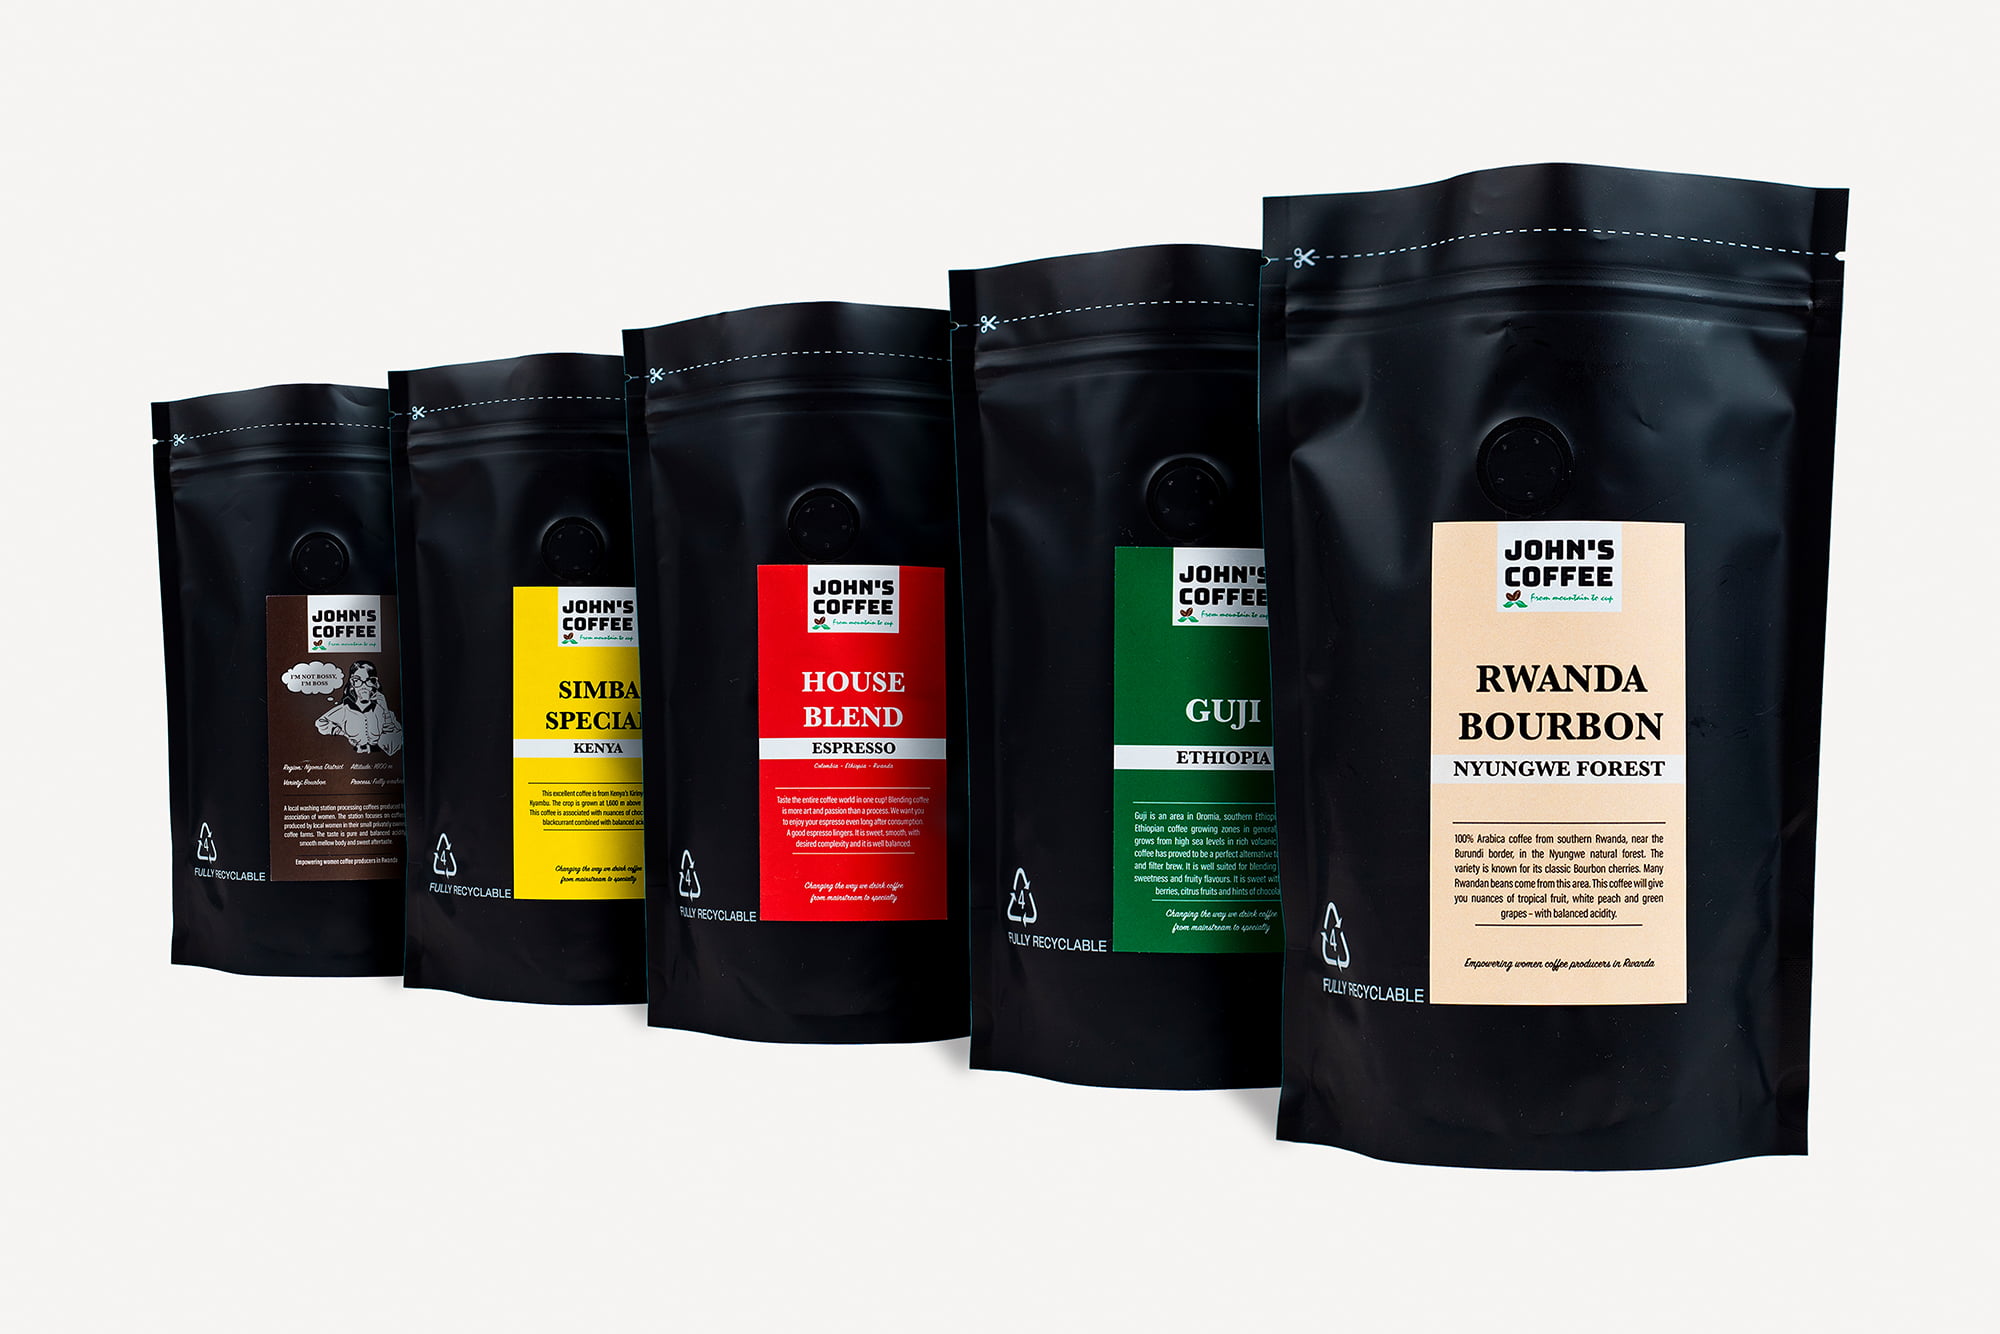 Johns Coffe Products